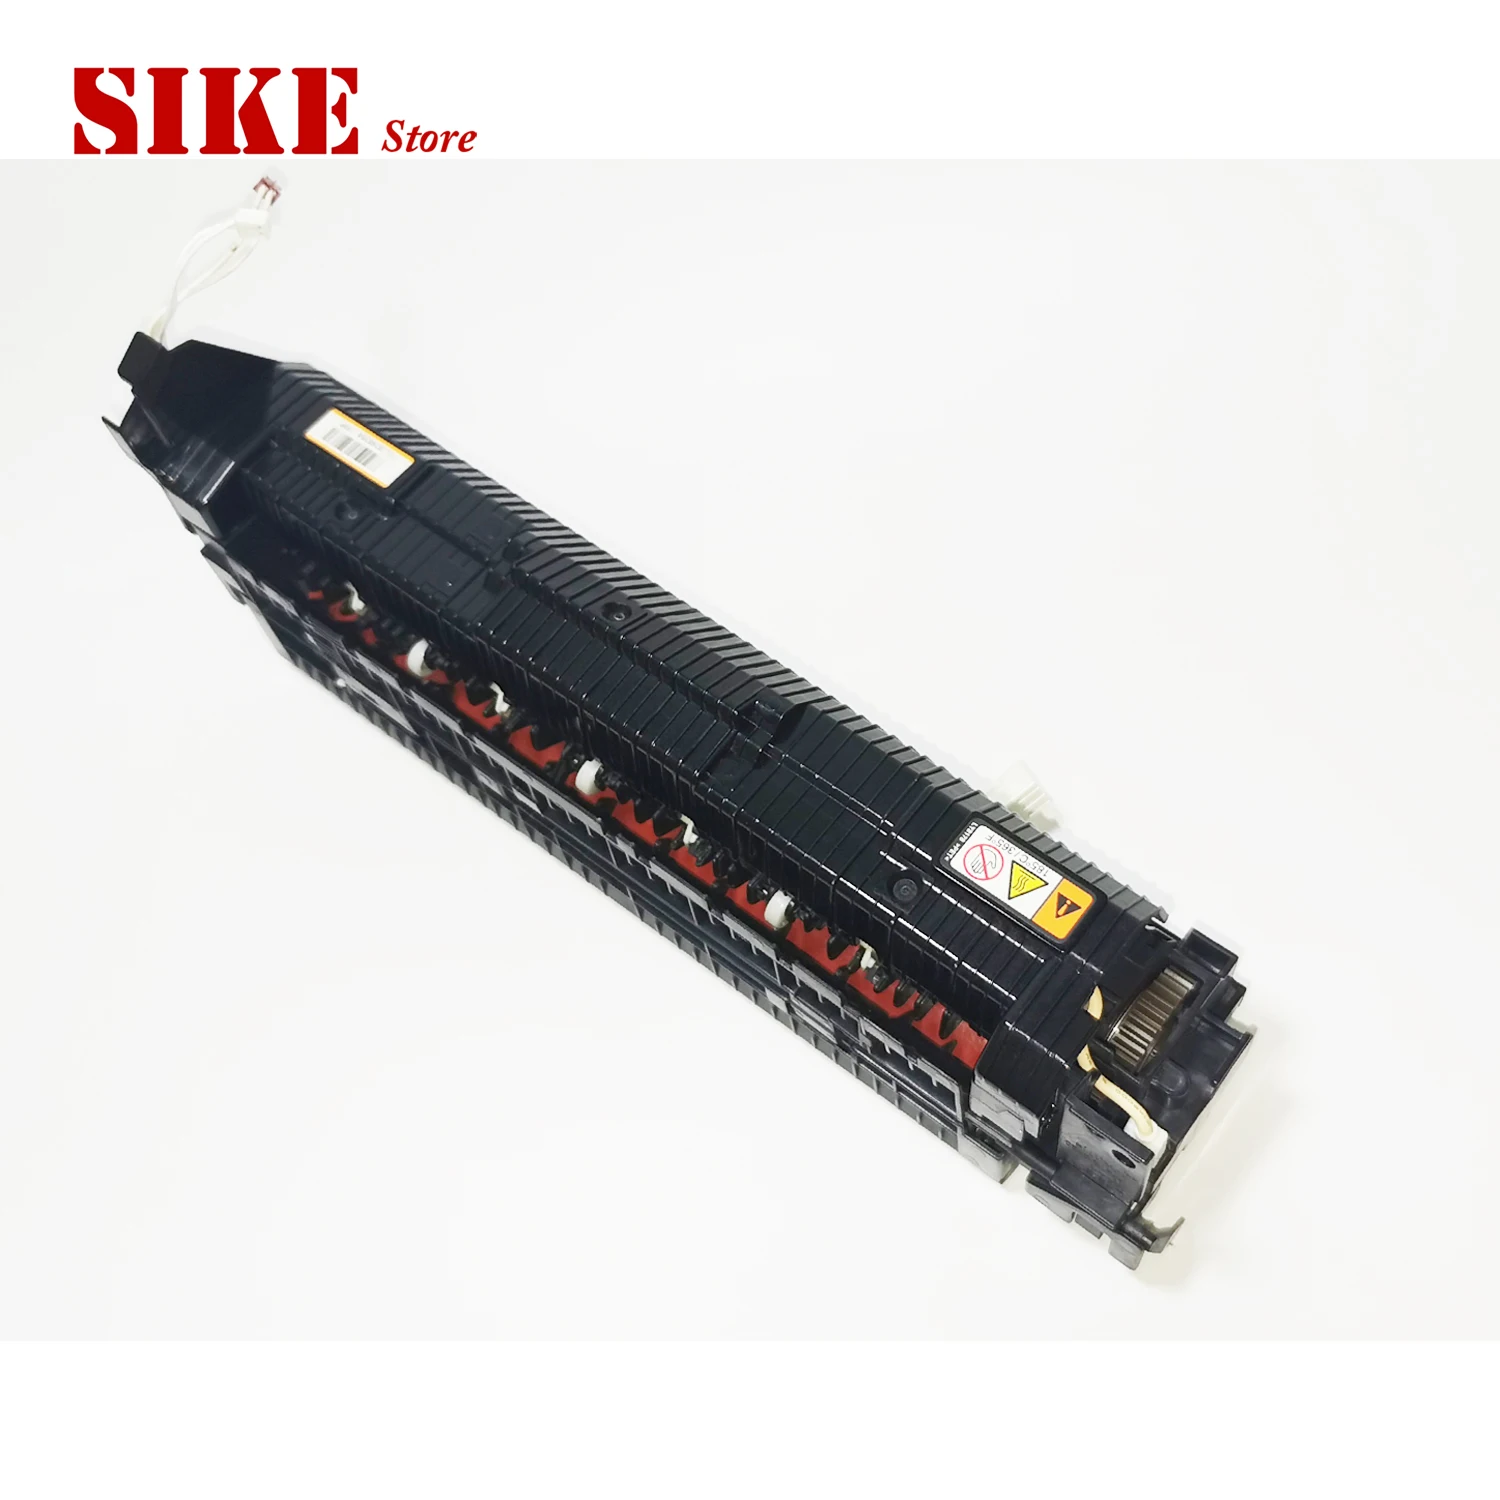 Assy  Brother MFC-1910W MFC-1911NW MFC 1910 1911 1912 1915 1916 1919 Fuser Assembly